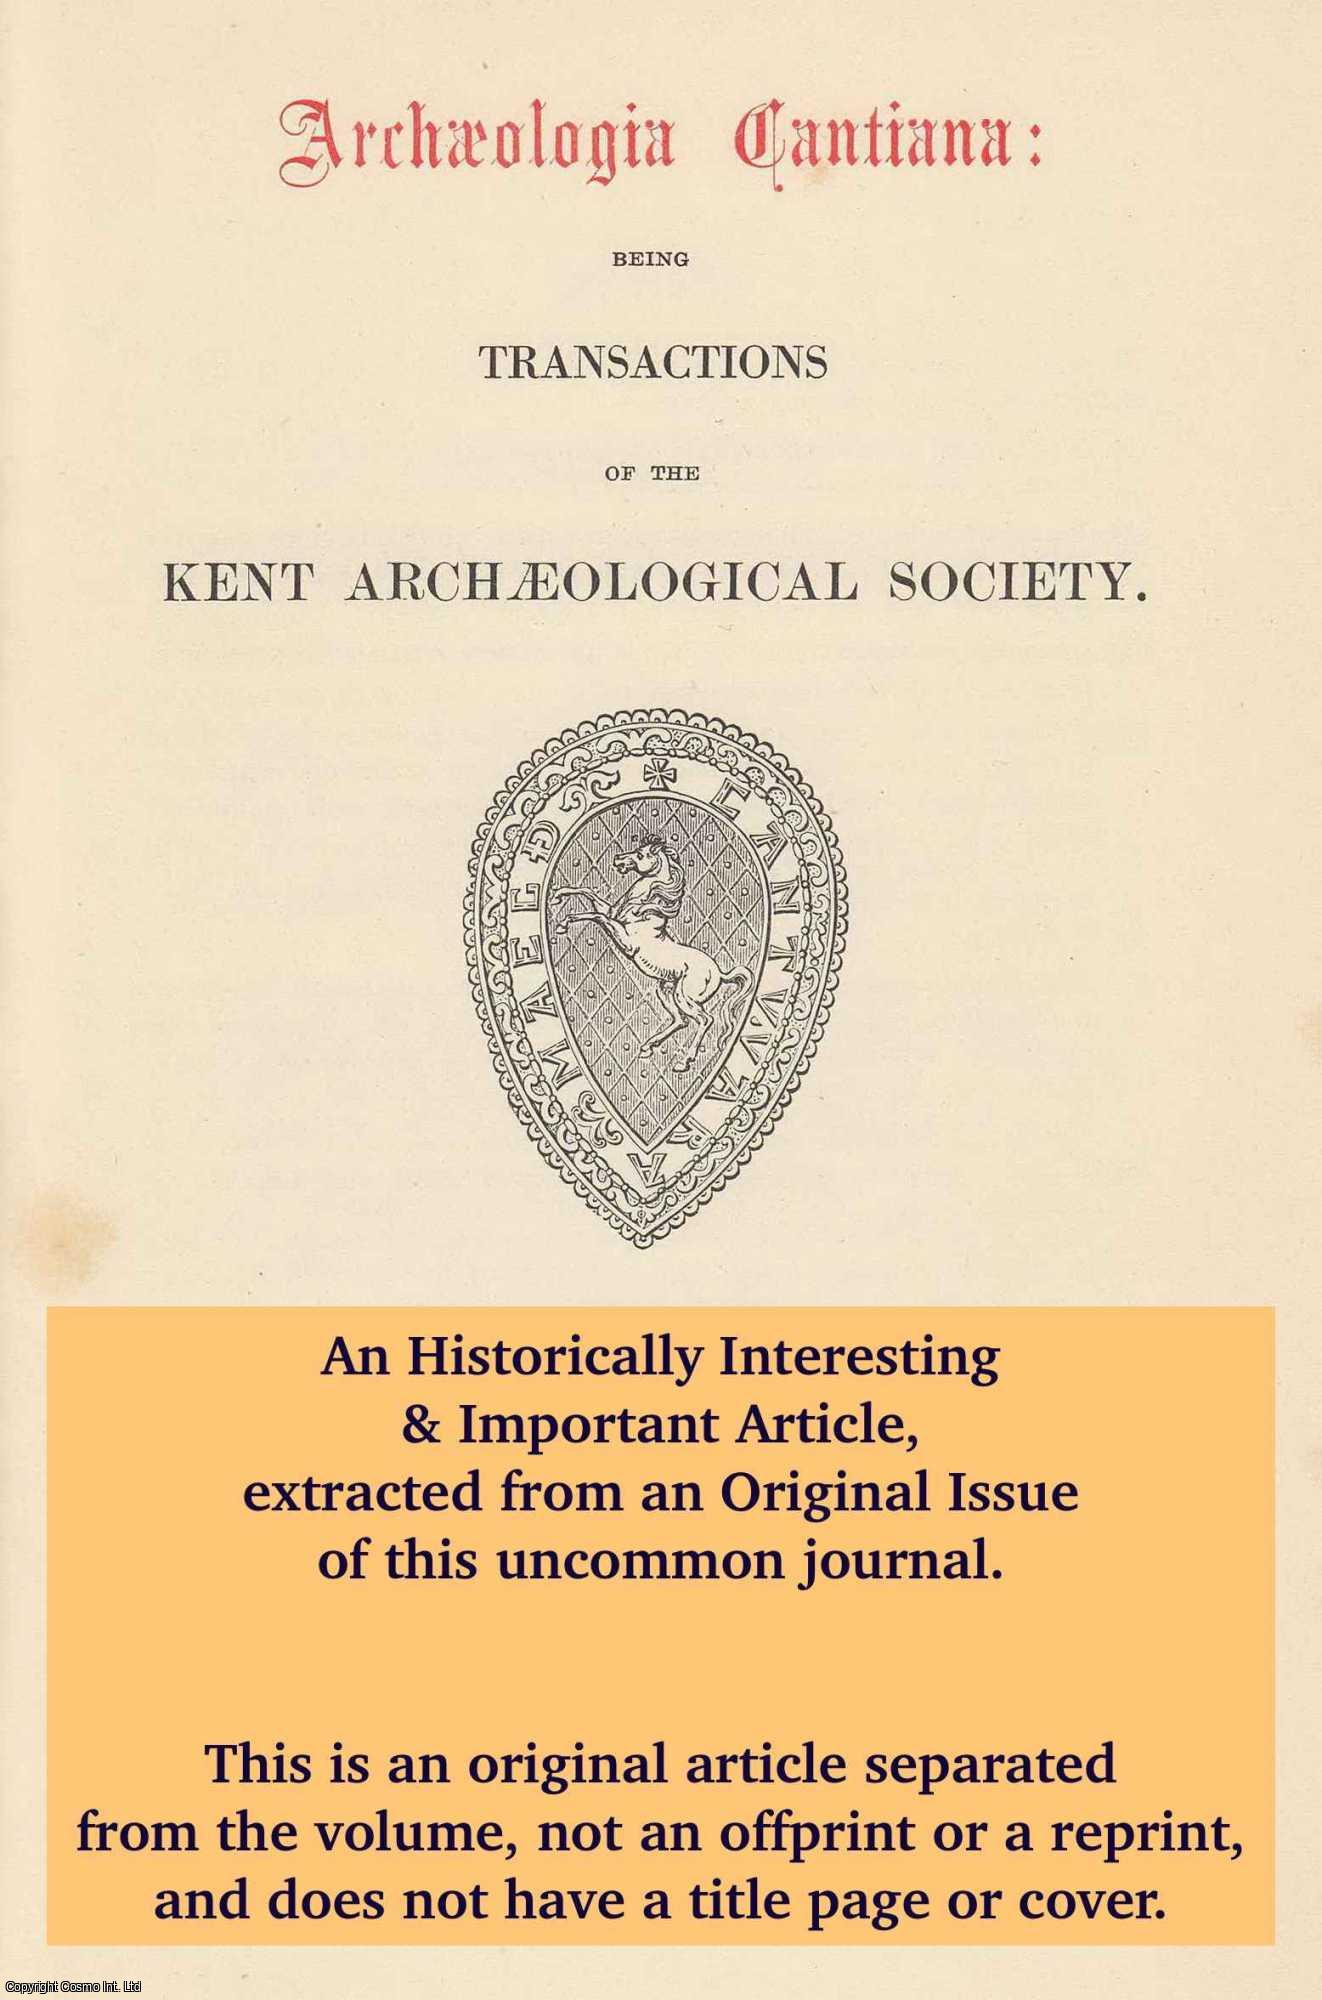 F. Hull - Memento Mori or Dr. Cliff's Diary, an Unusual Demographic Document. An original article from The Archaeologia Cantiana, 1974.